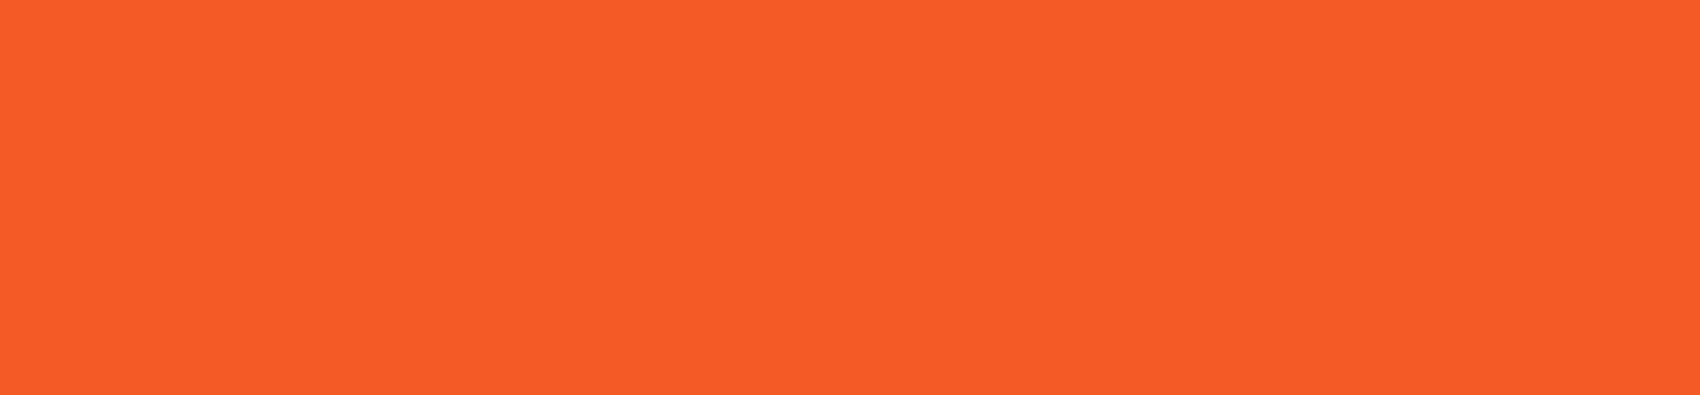 An orange bar. This is a decorative image only.